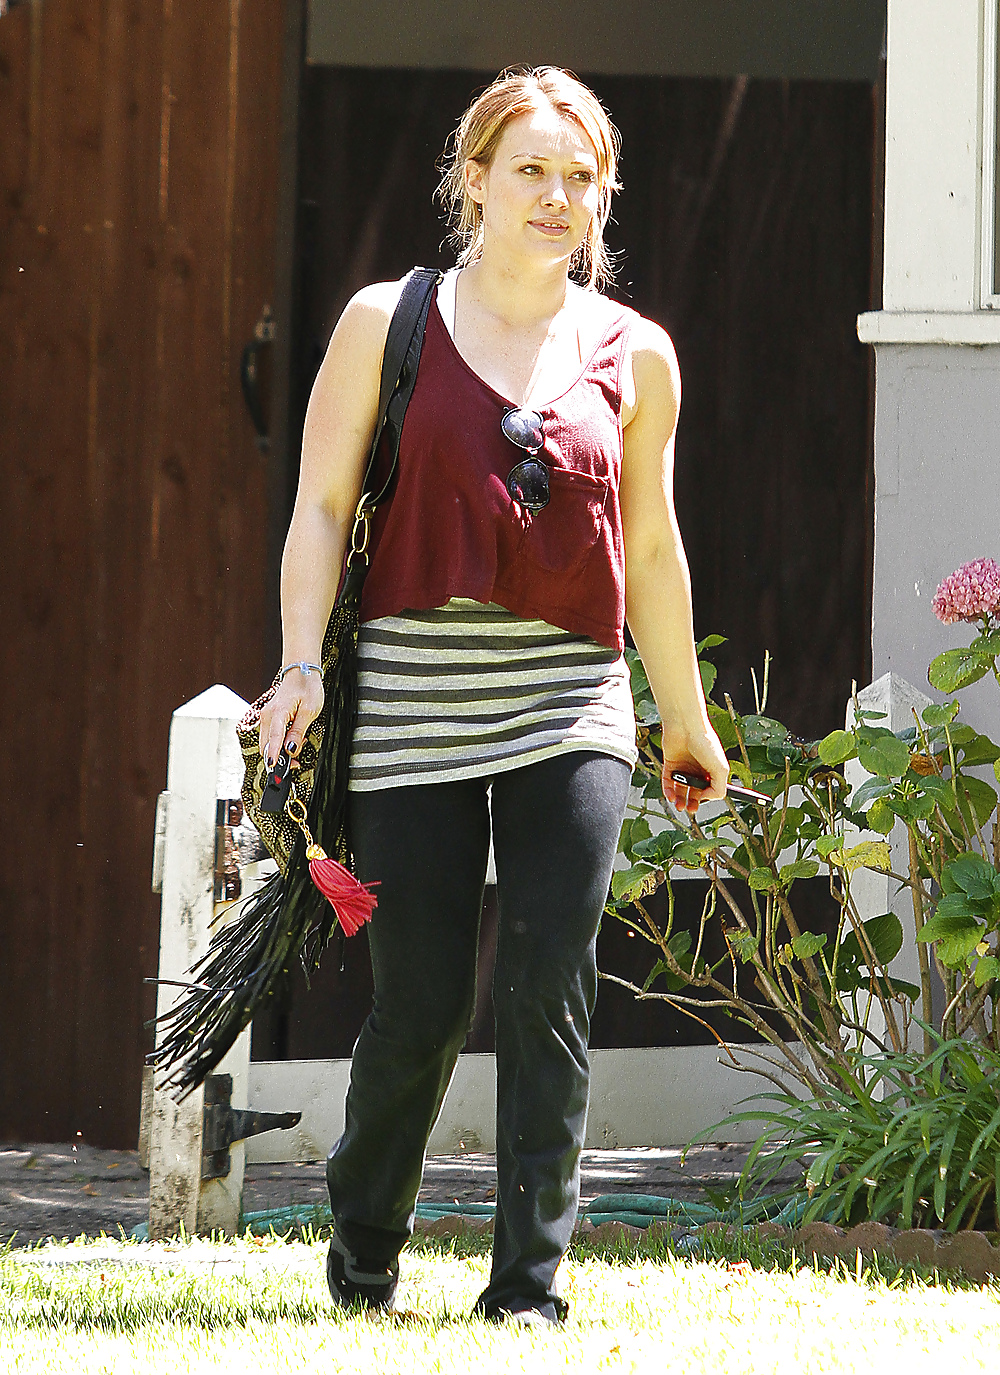 Hilary Duff Goes To Yoga Class Looking Happy Hollywood #7464087